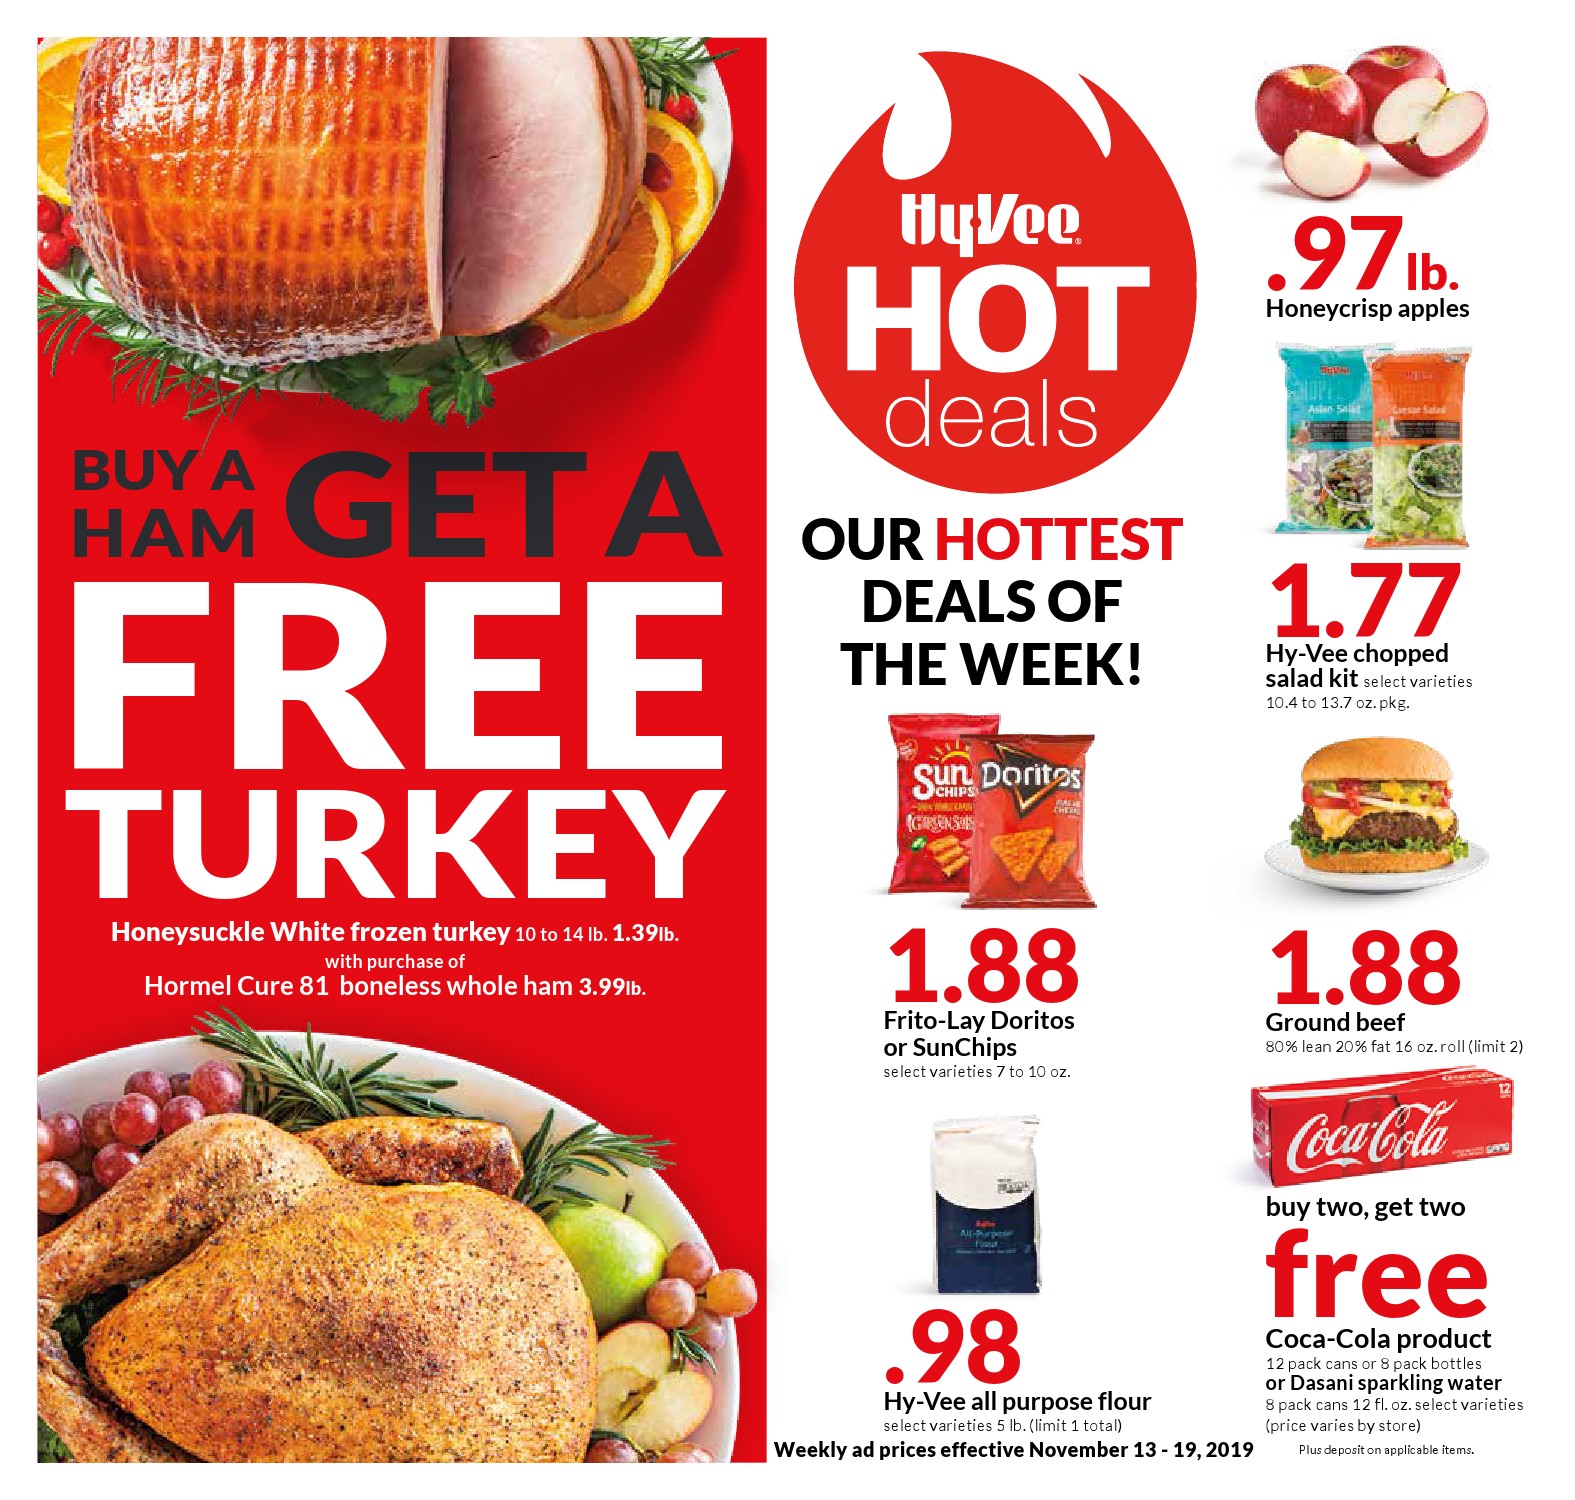 Organic food, party foods, fresh meat, and more products of Hyvee Weekly Ad Nov 13 - ...